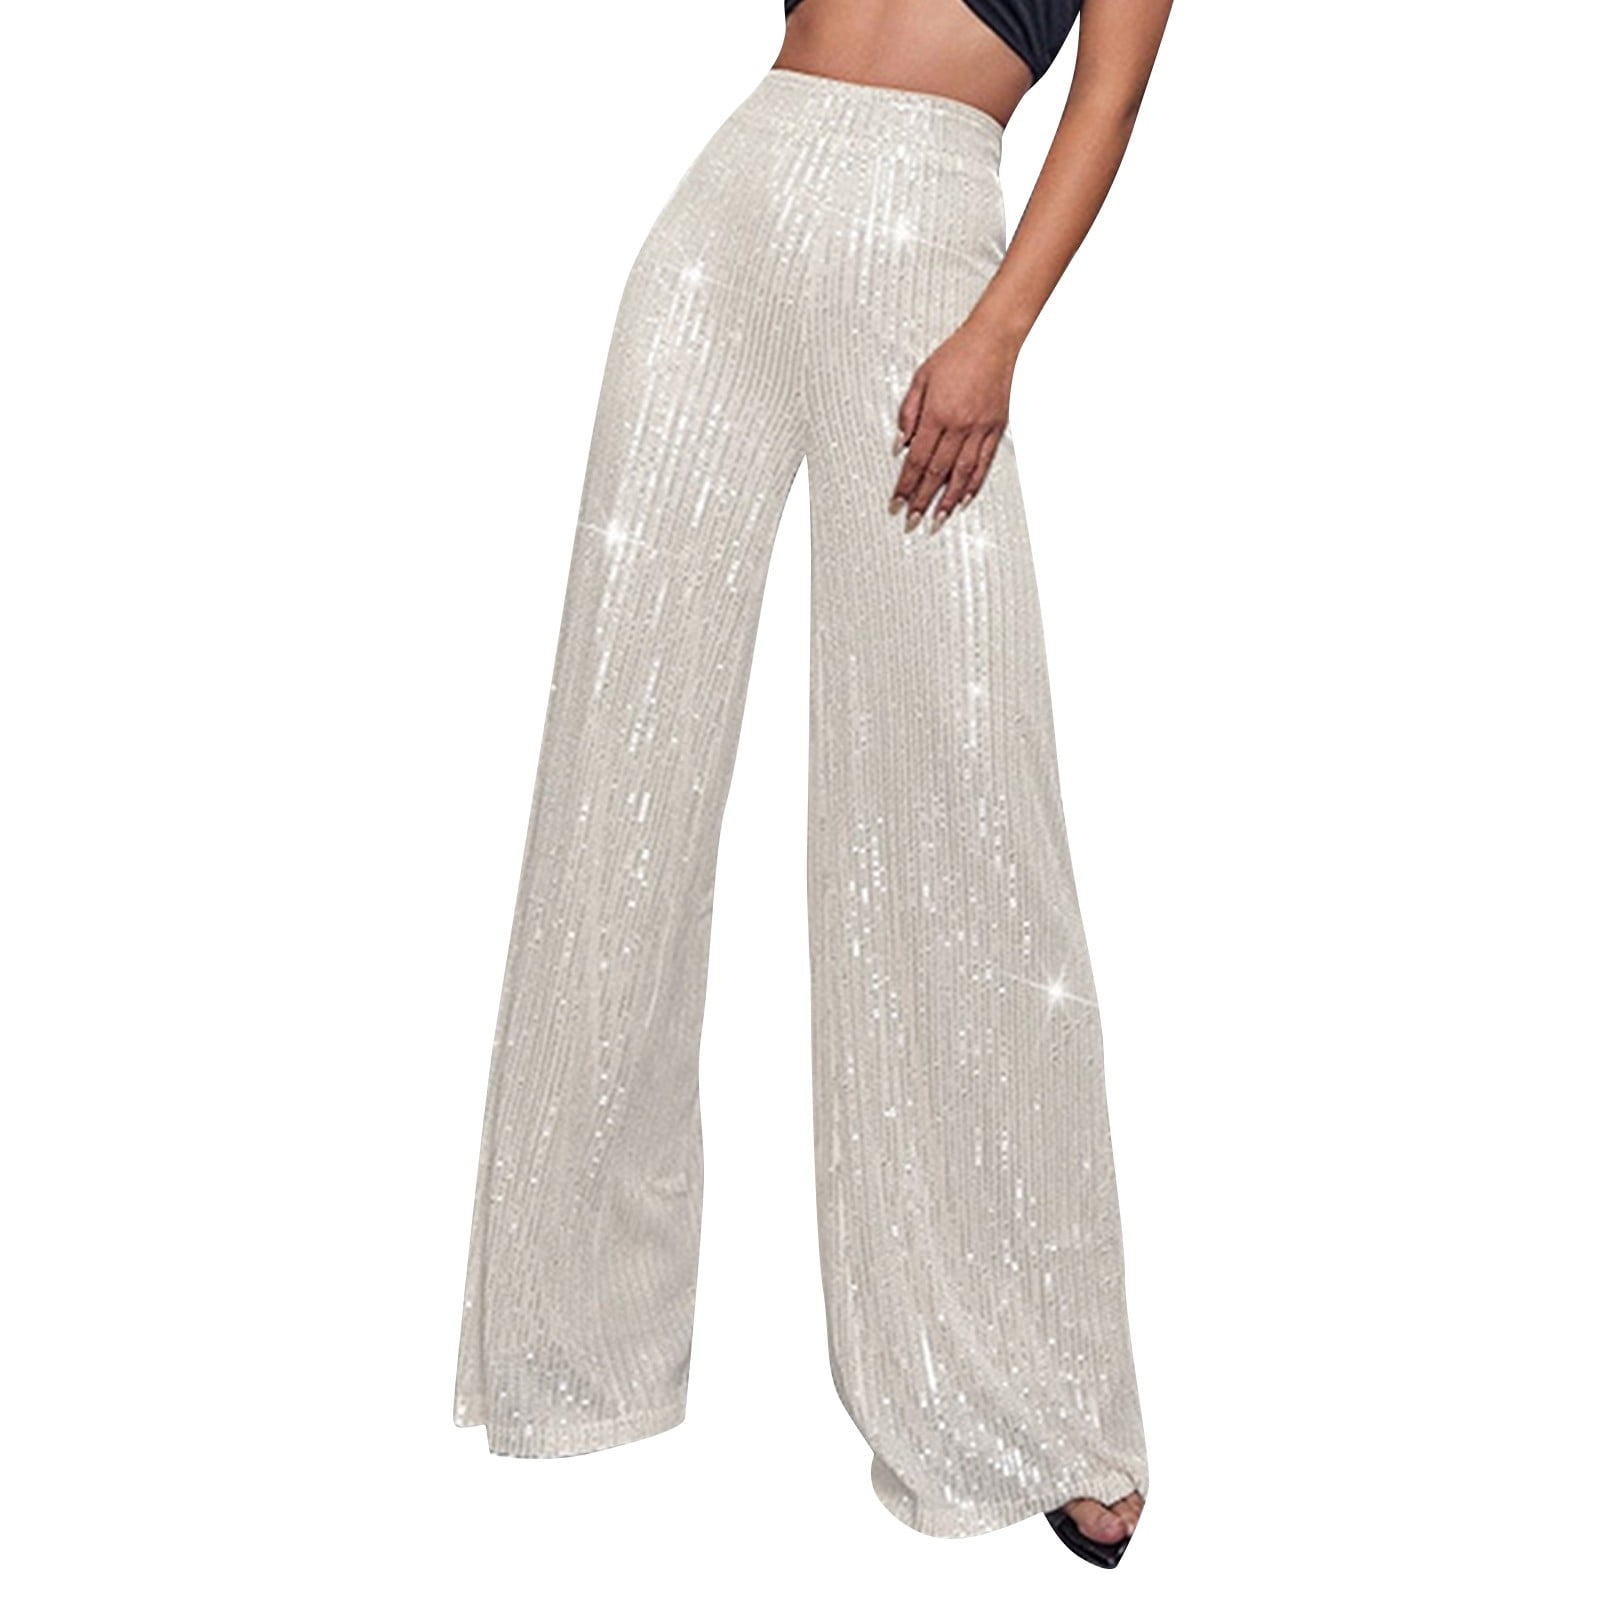 7 Glamorous Holiday Party Pants Outfits -